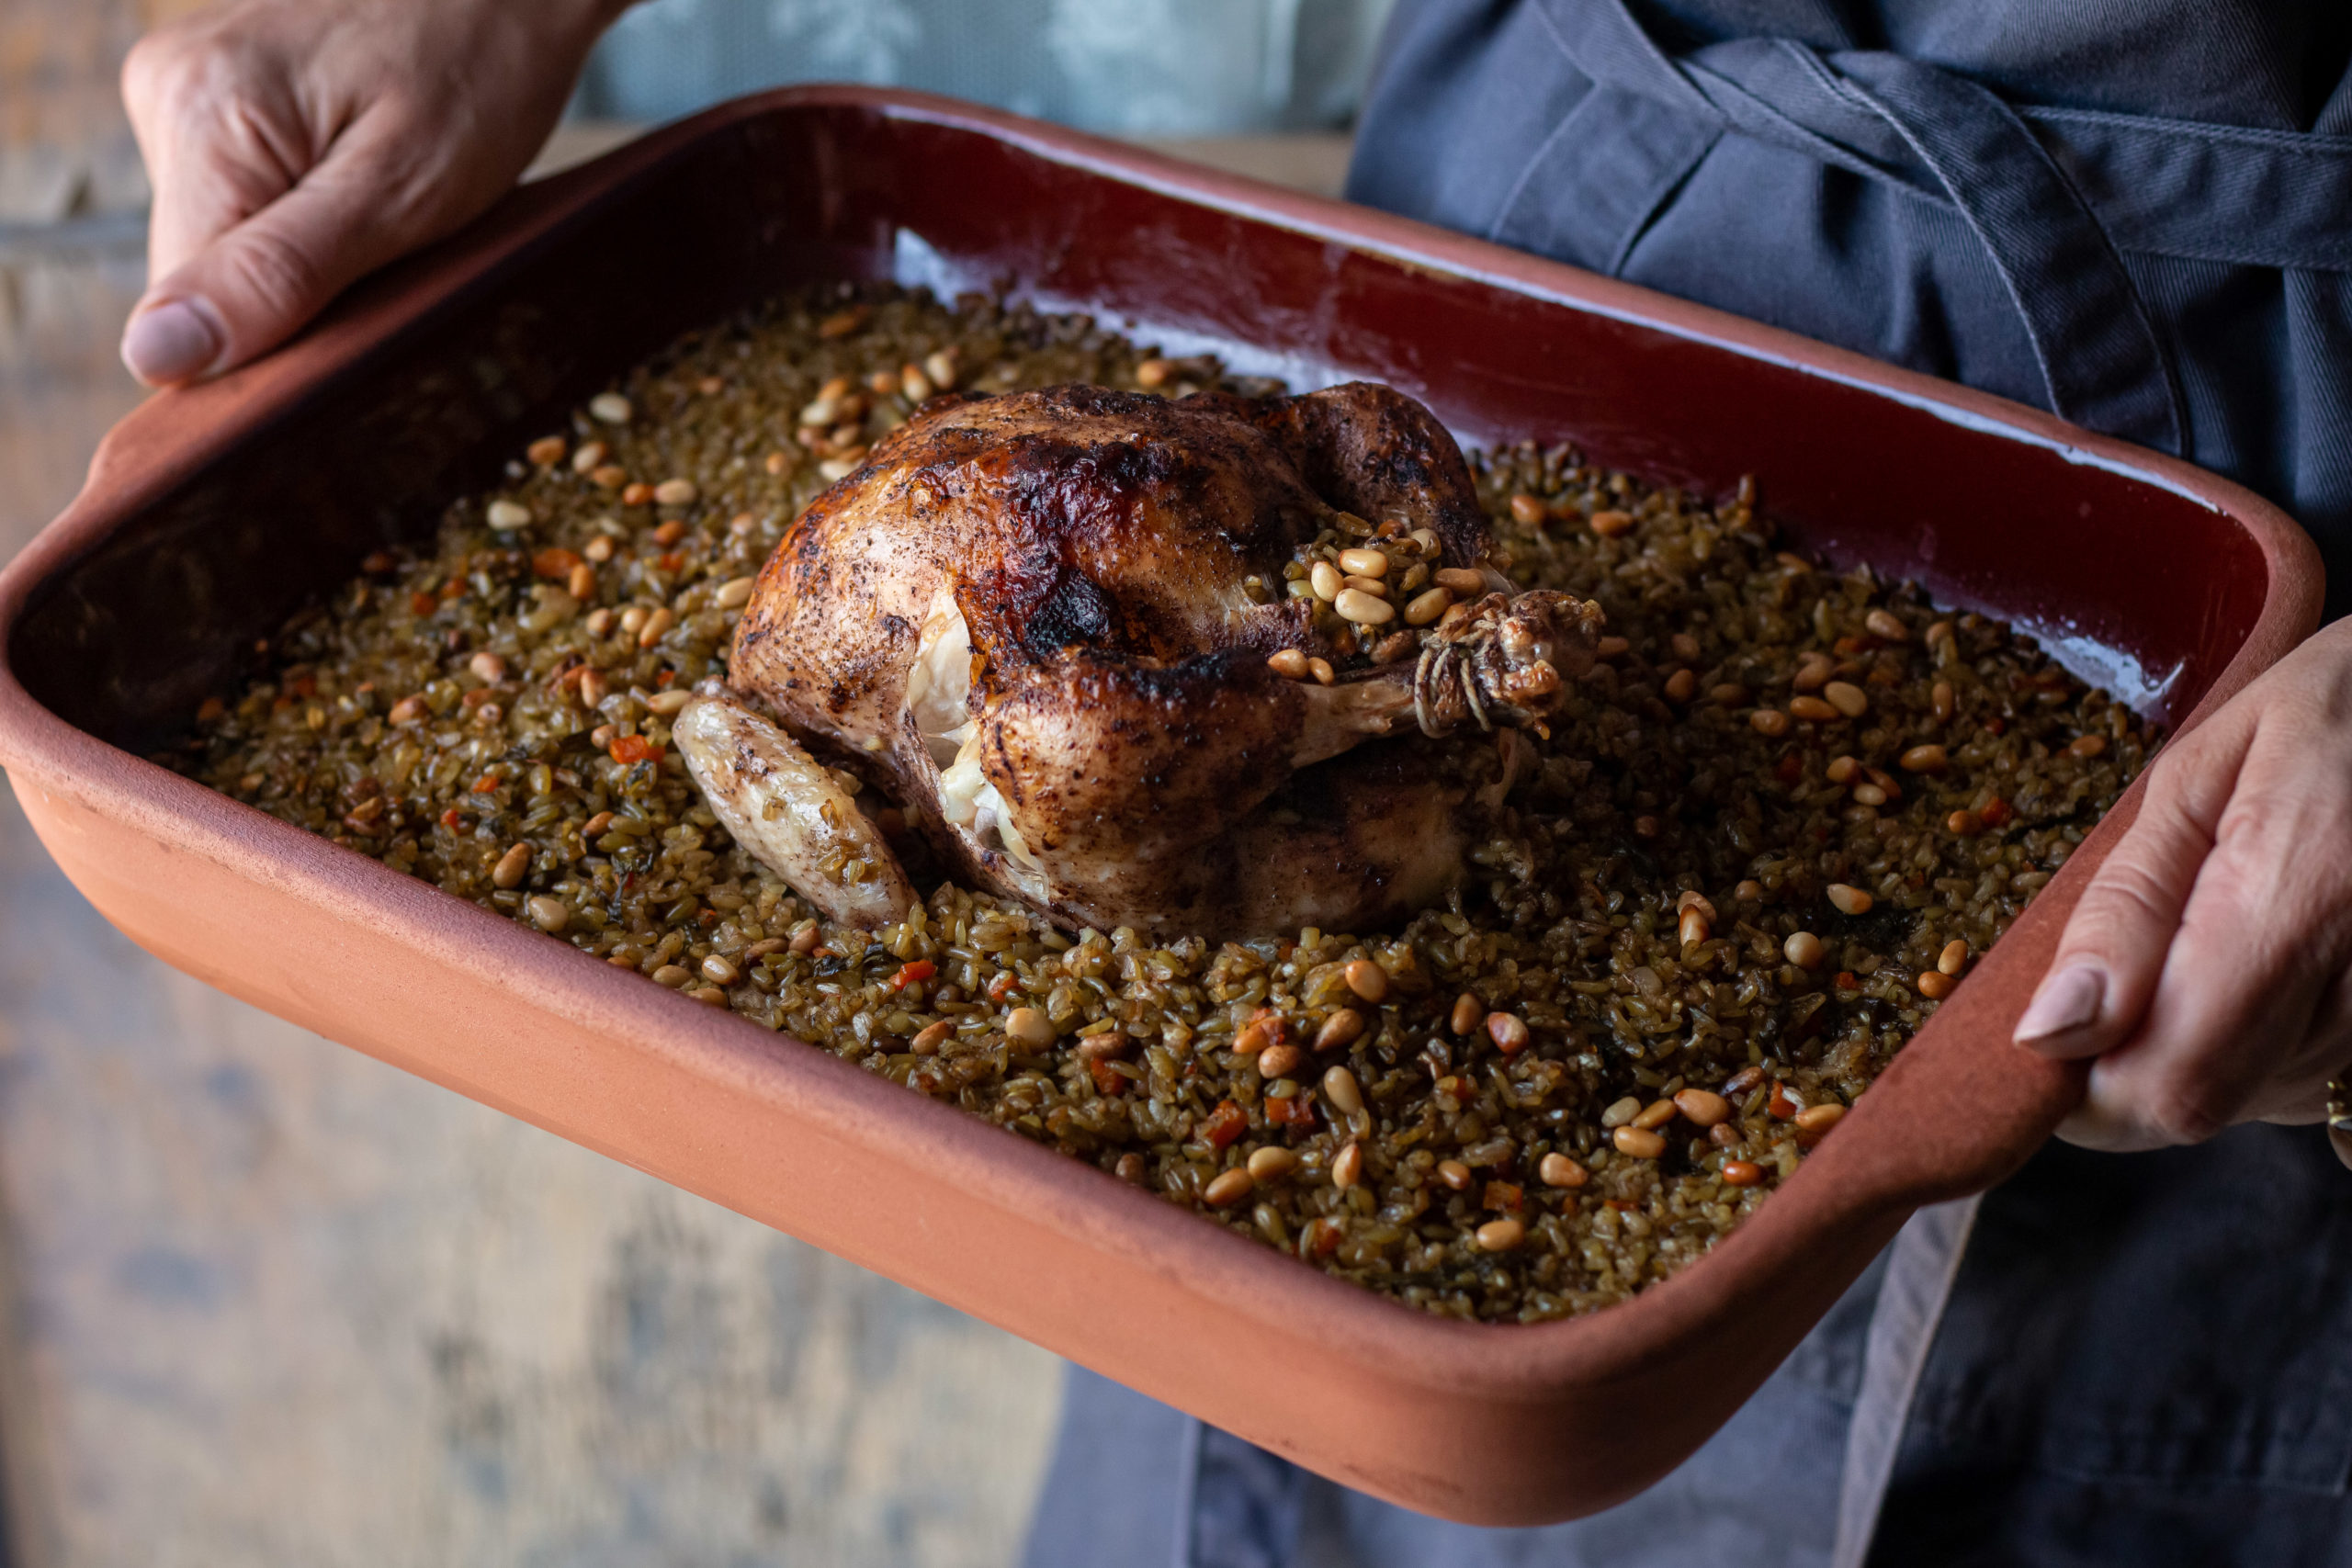 Chicken stuffed with freekeh in a baking tray held by a woman in an apron